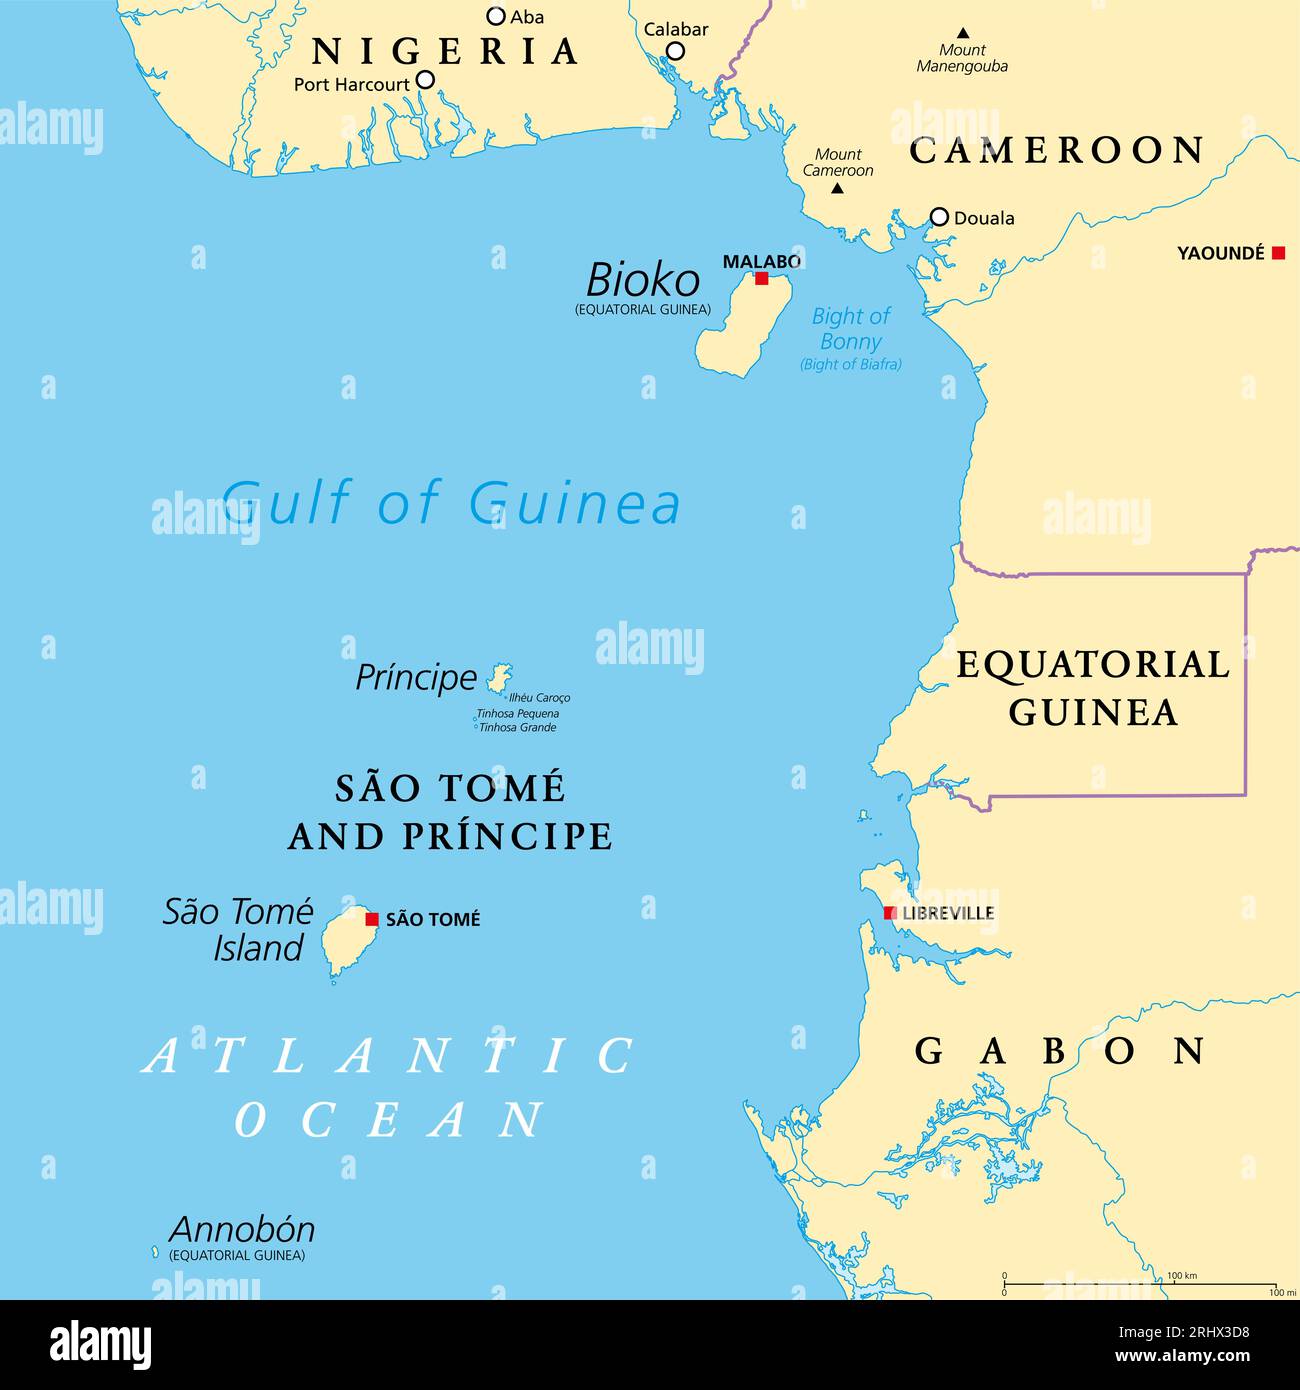 Cameroon line, volcanic island chain off the coast of West Africa, political map. Long chain of volcanoes including islands in the Gulf of Guinea. Stock Photo